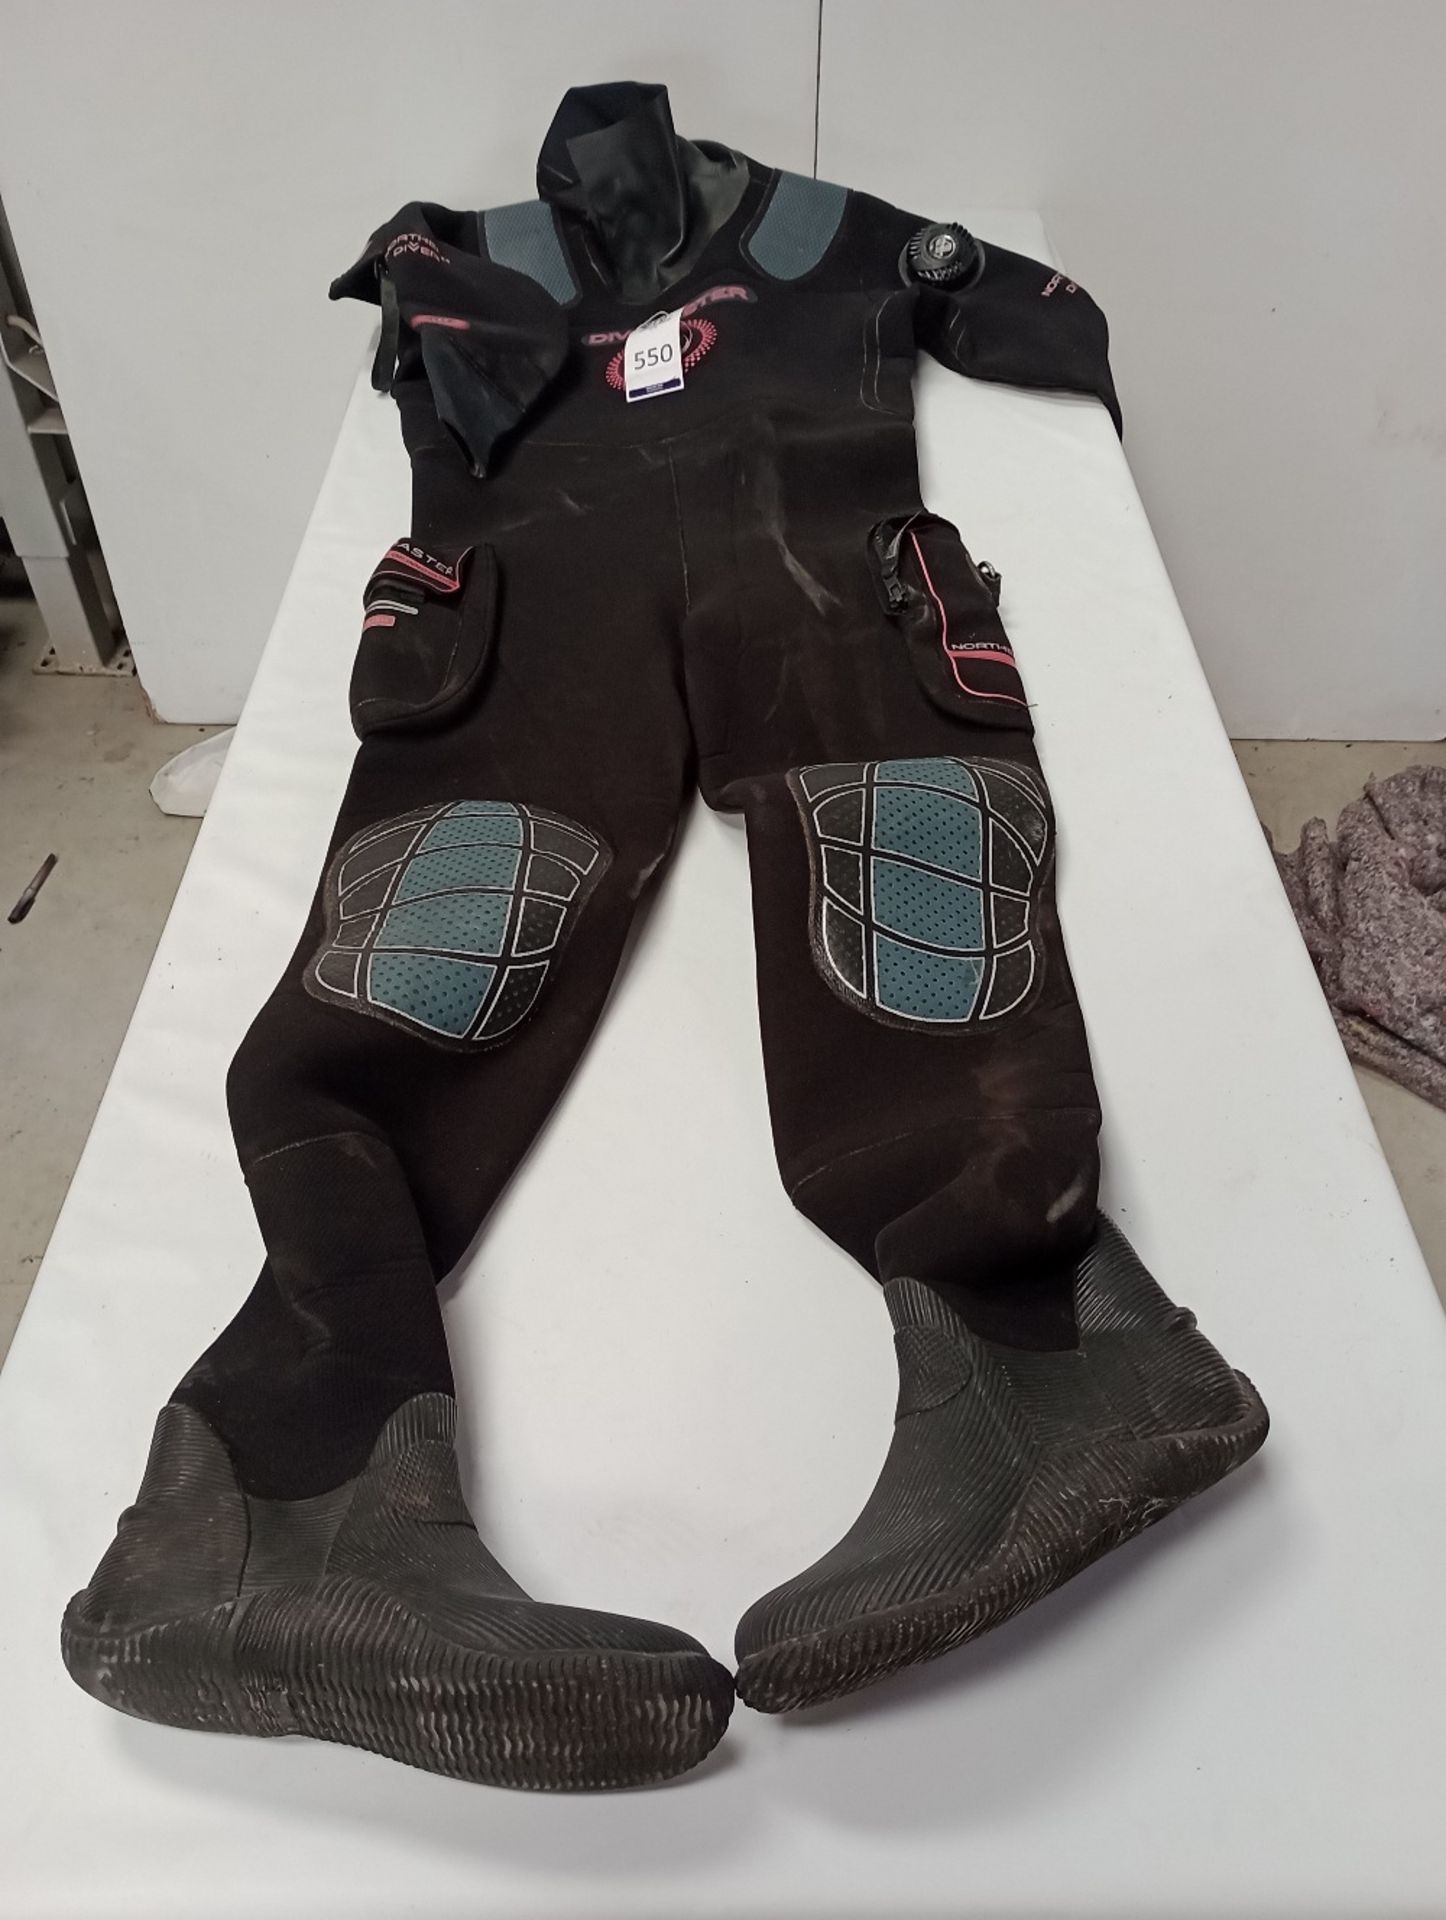 Northern Diver Divemaster, Size Medium R (Gents), Boot 8 (Location: Brentwood. Please Refer to